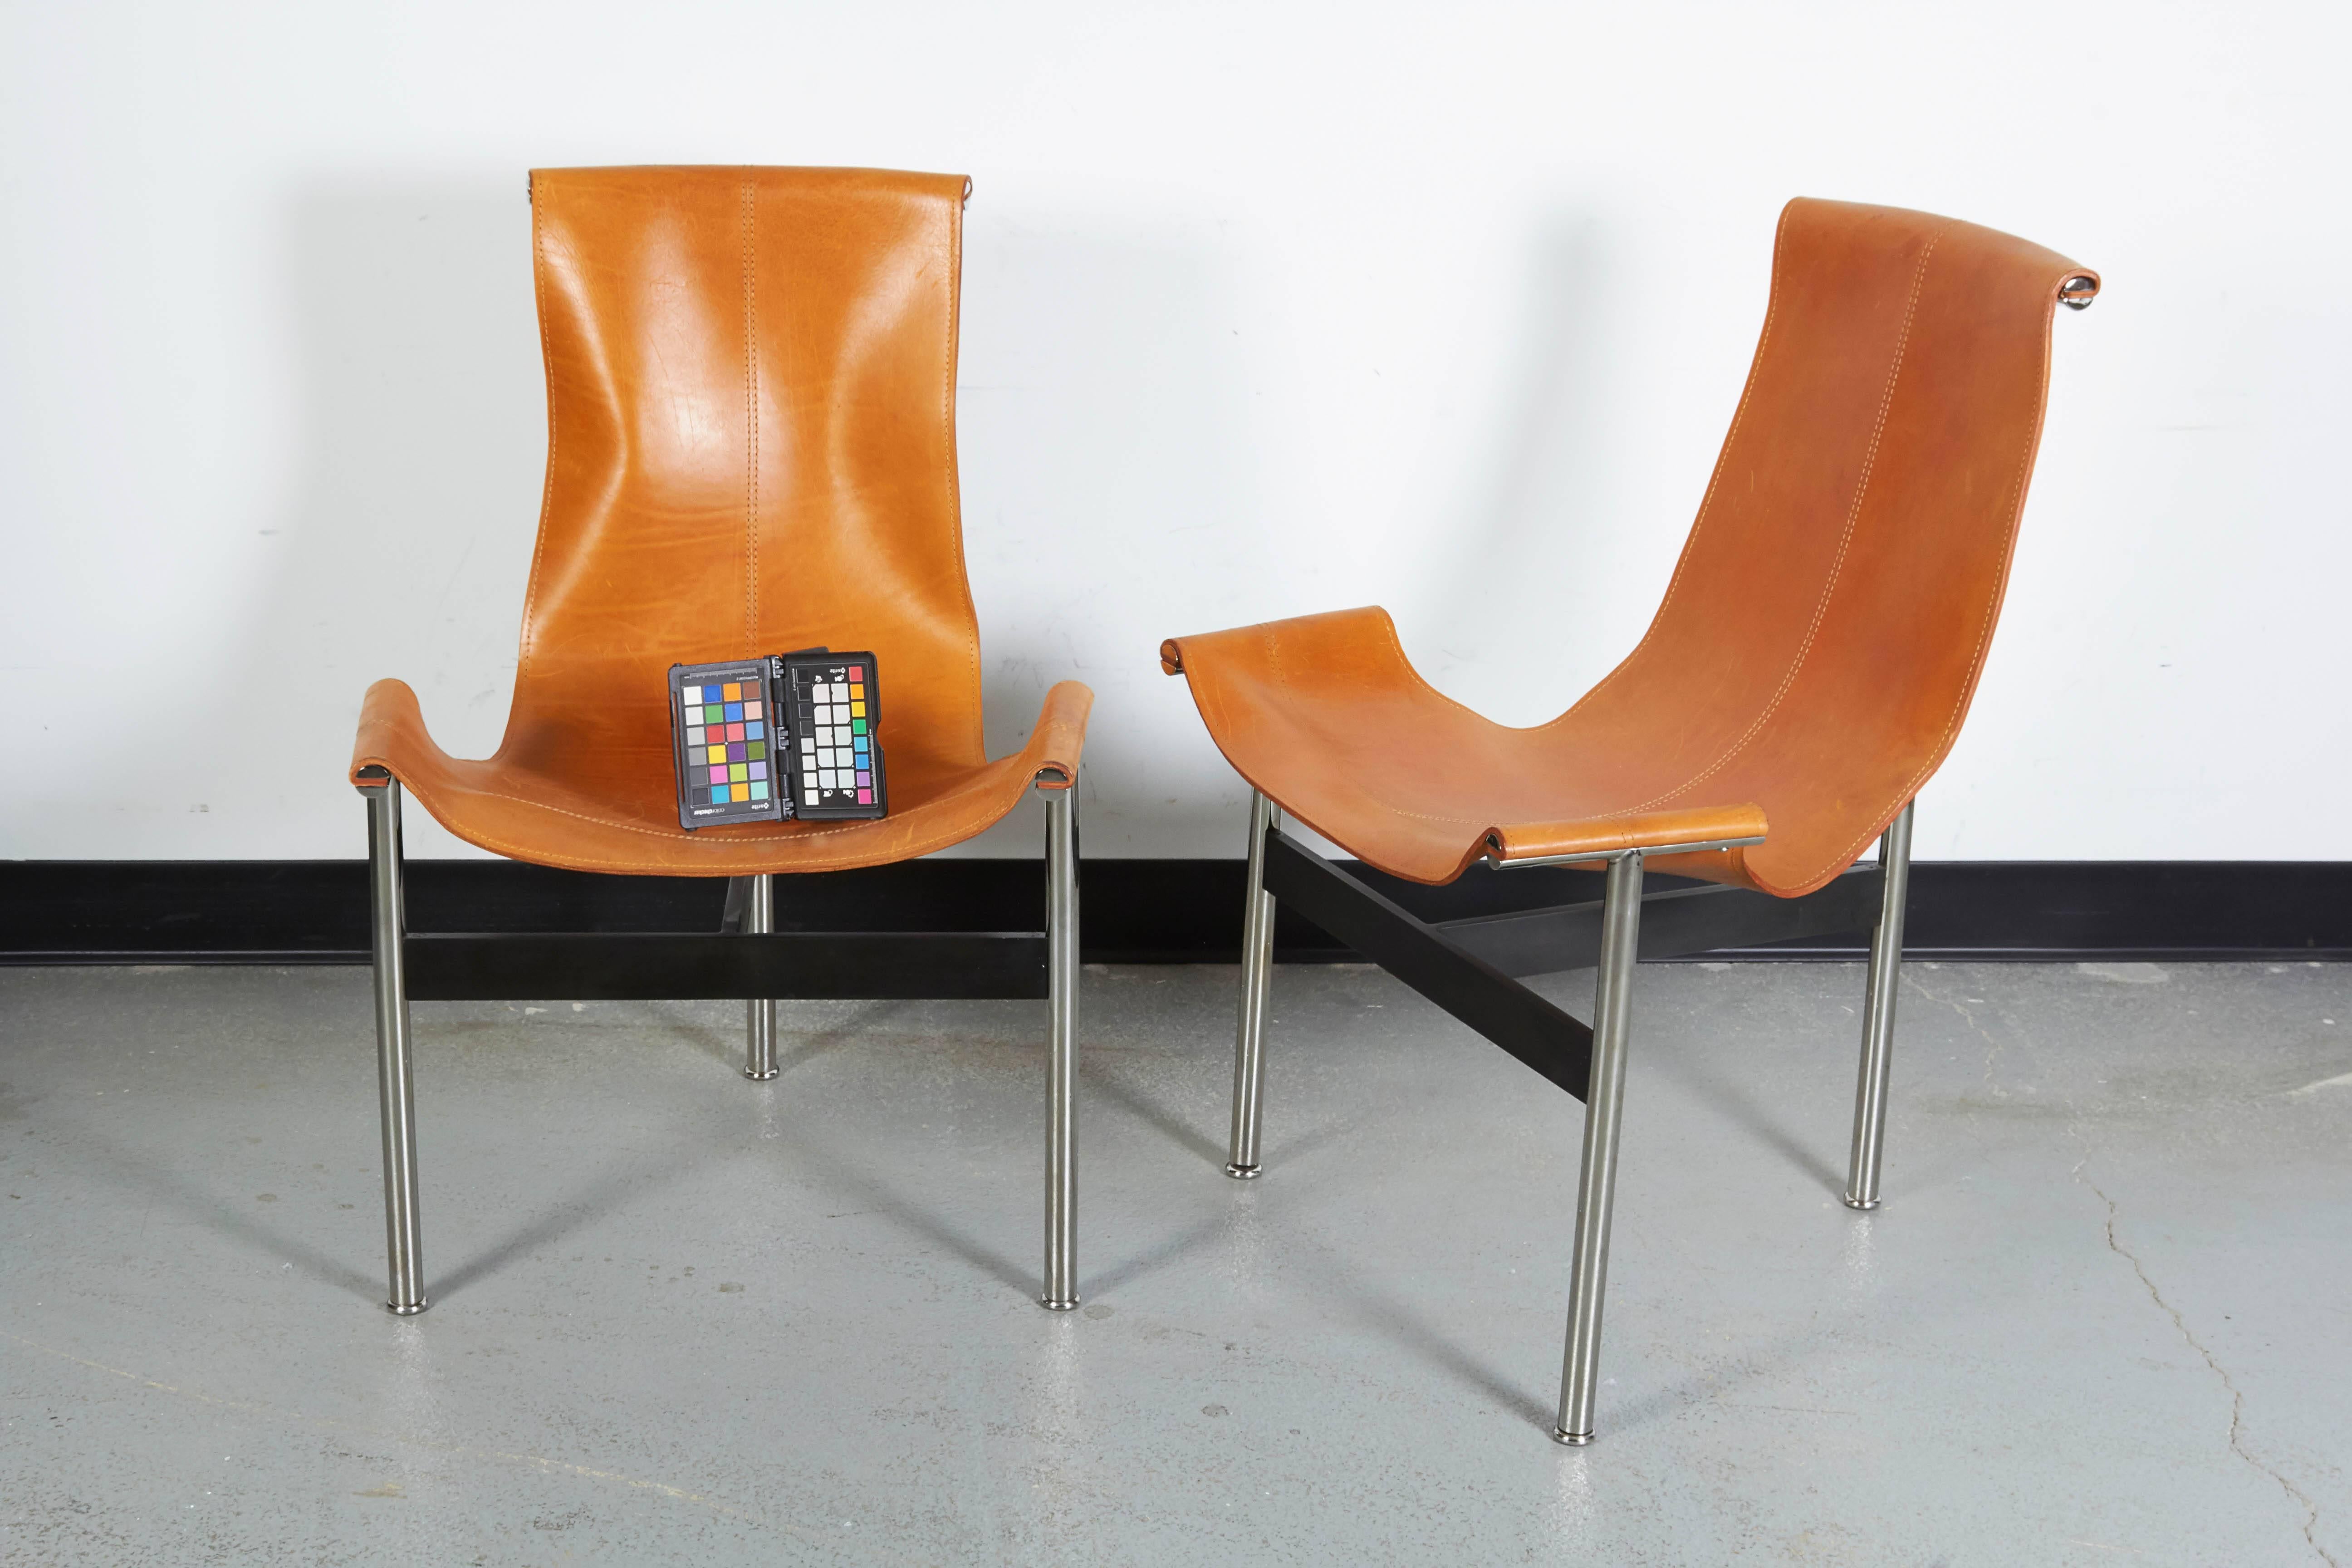 Elegant three-legged chairs with chrome-plated tubular steel legs joined by enameled steel stretchers with leather sling seat. Note one chair shows wear to leather on top rail; otherwise in excellent condition. 

Designed by William Katavolos for